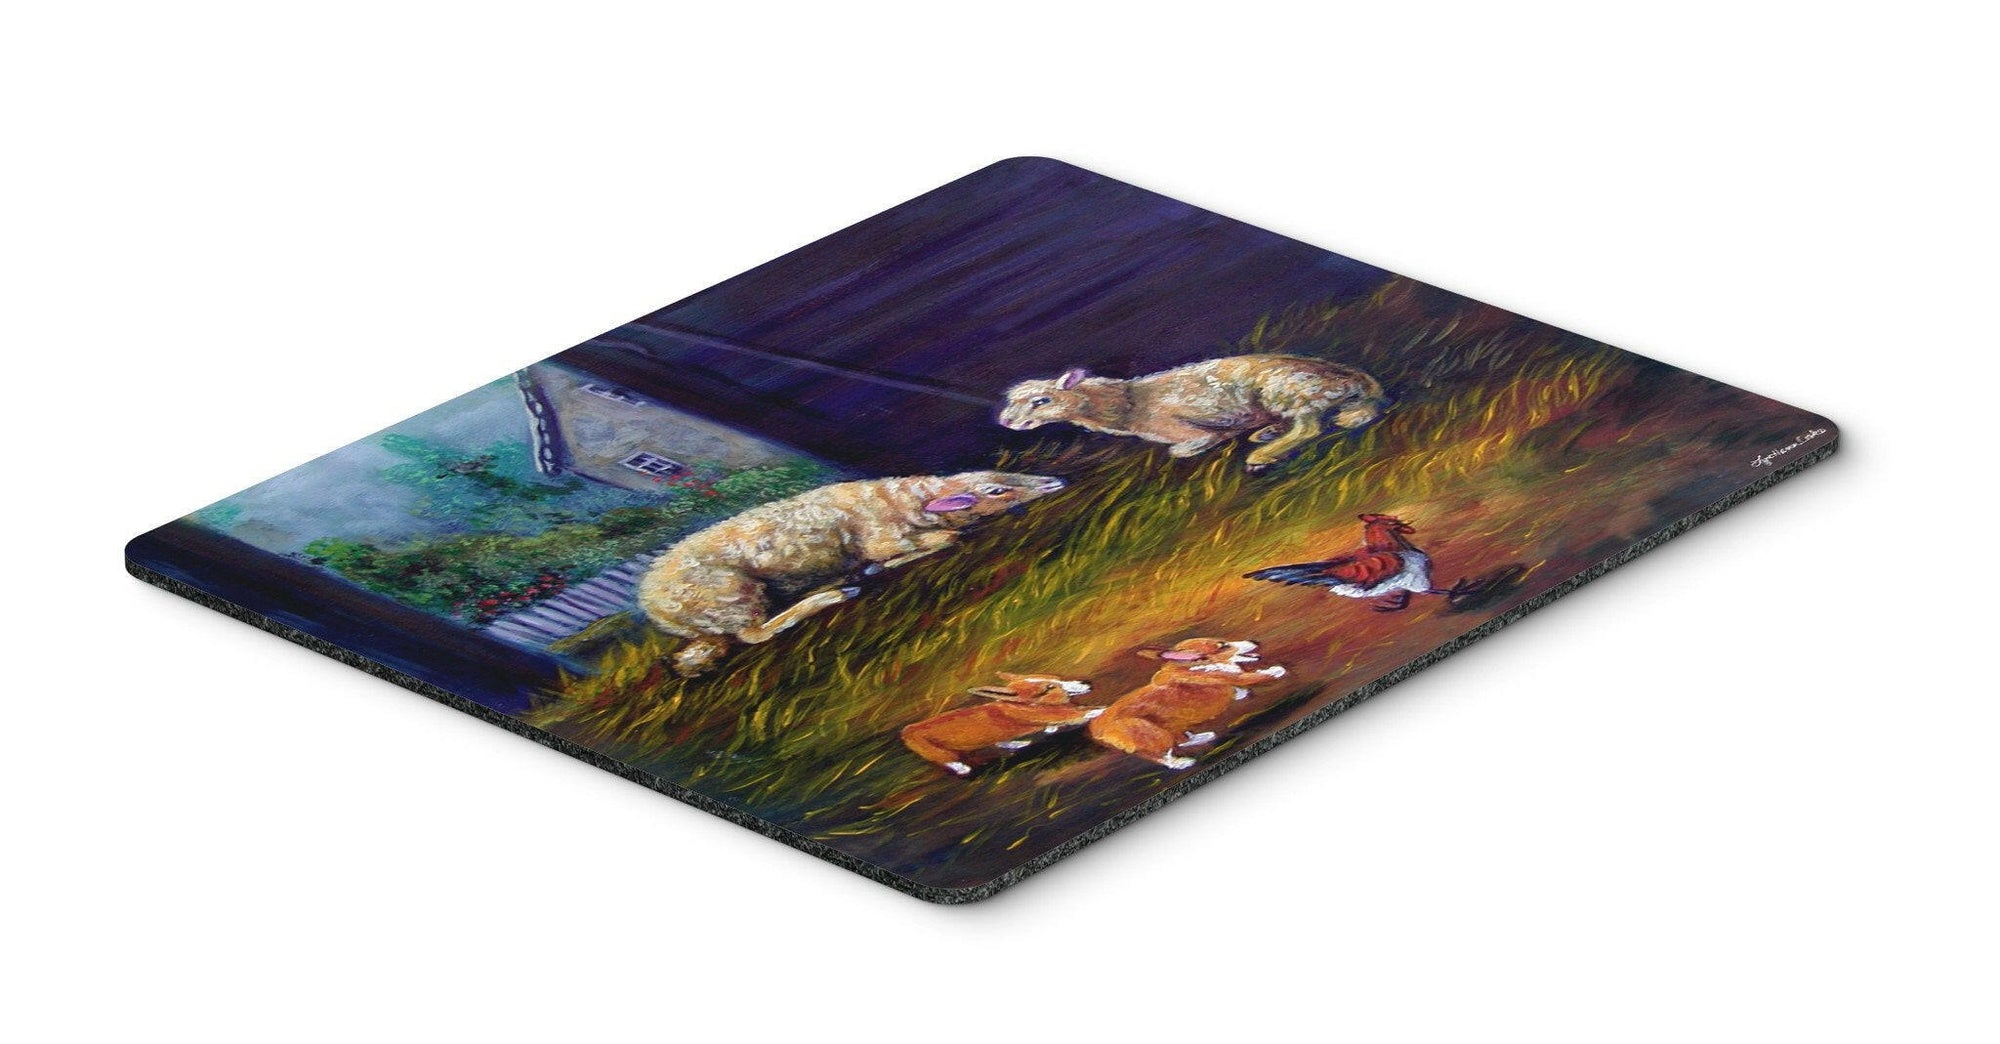 Corgi Chaos in the barn with sheep Mouse Pad, Hot Pad or Trivet 7322MP by Caroline's Treasures